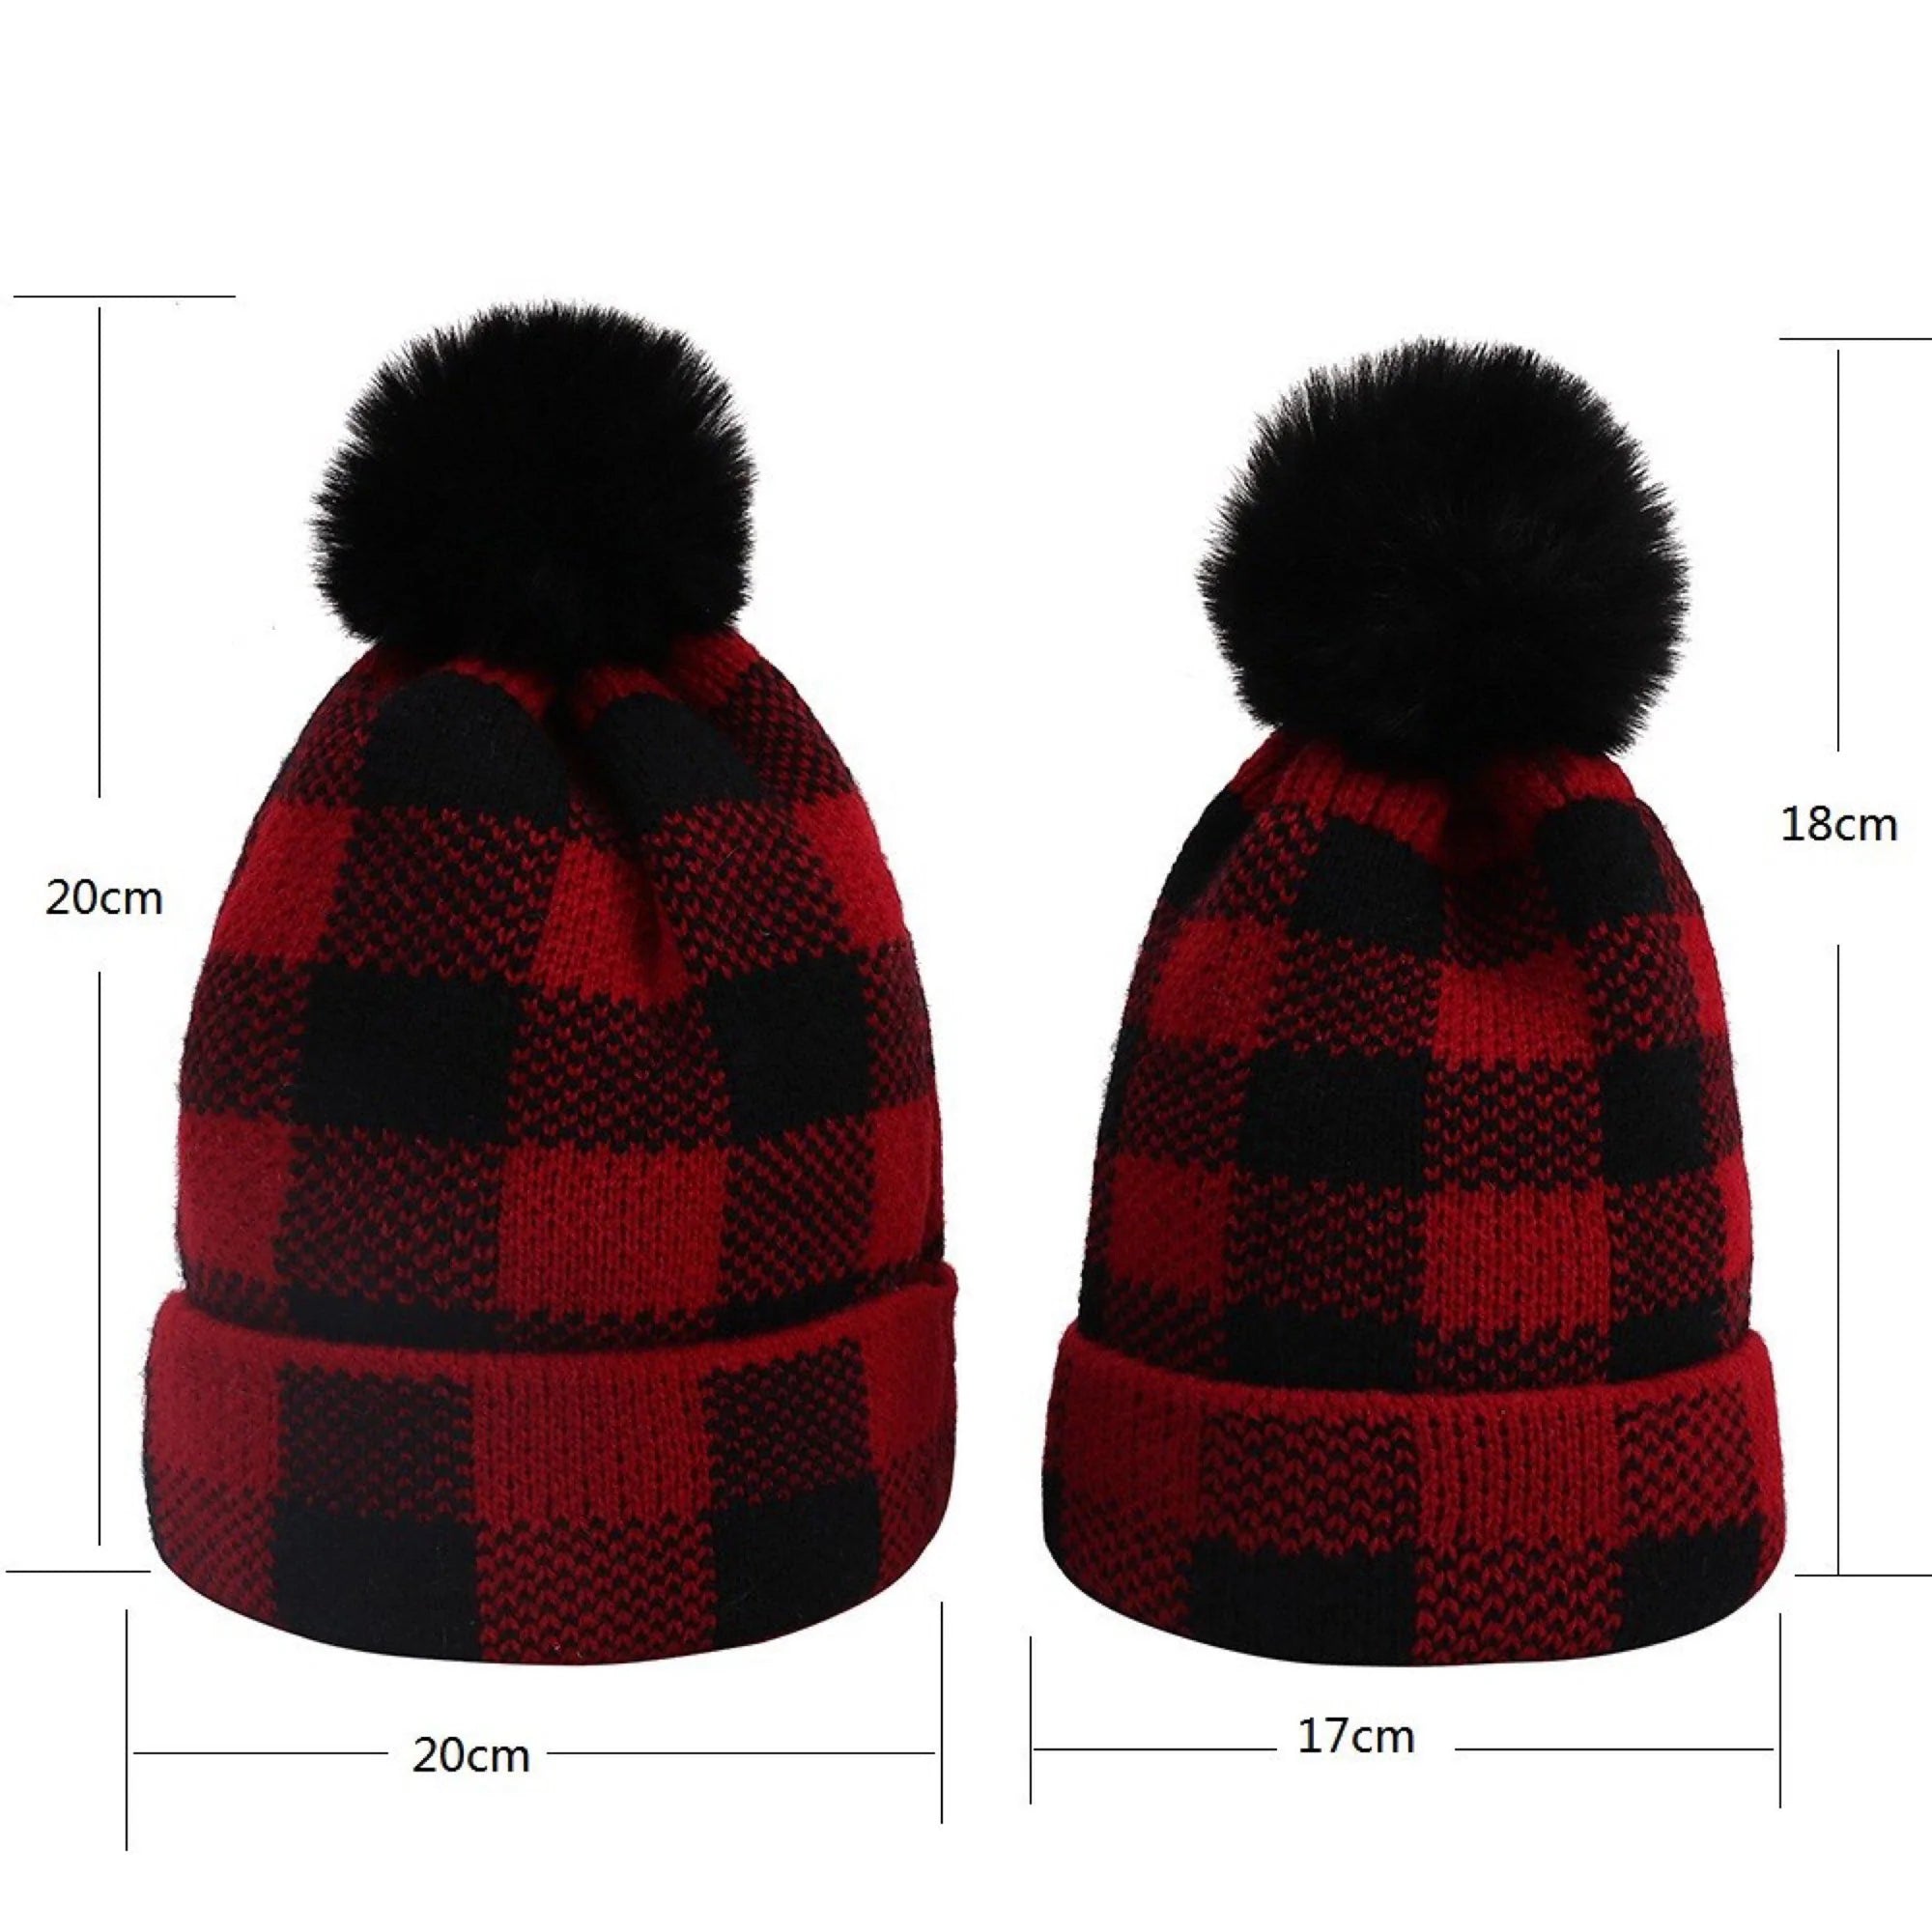 adult and child red and black buffalo plaid beanies with black poms on top with dimensions